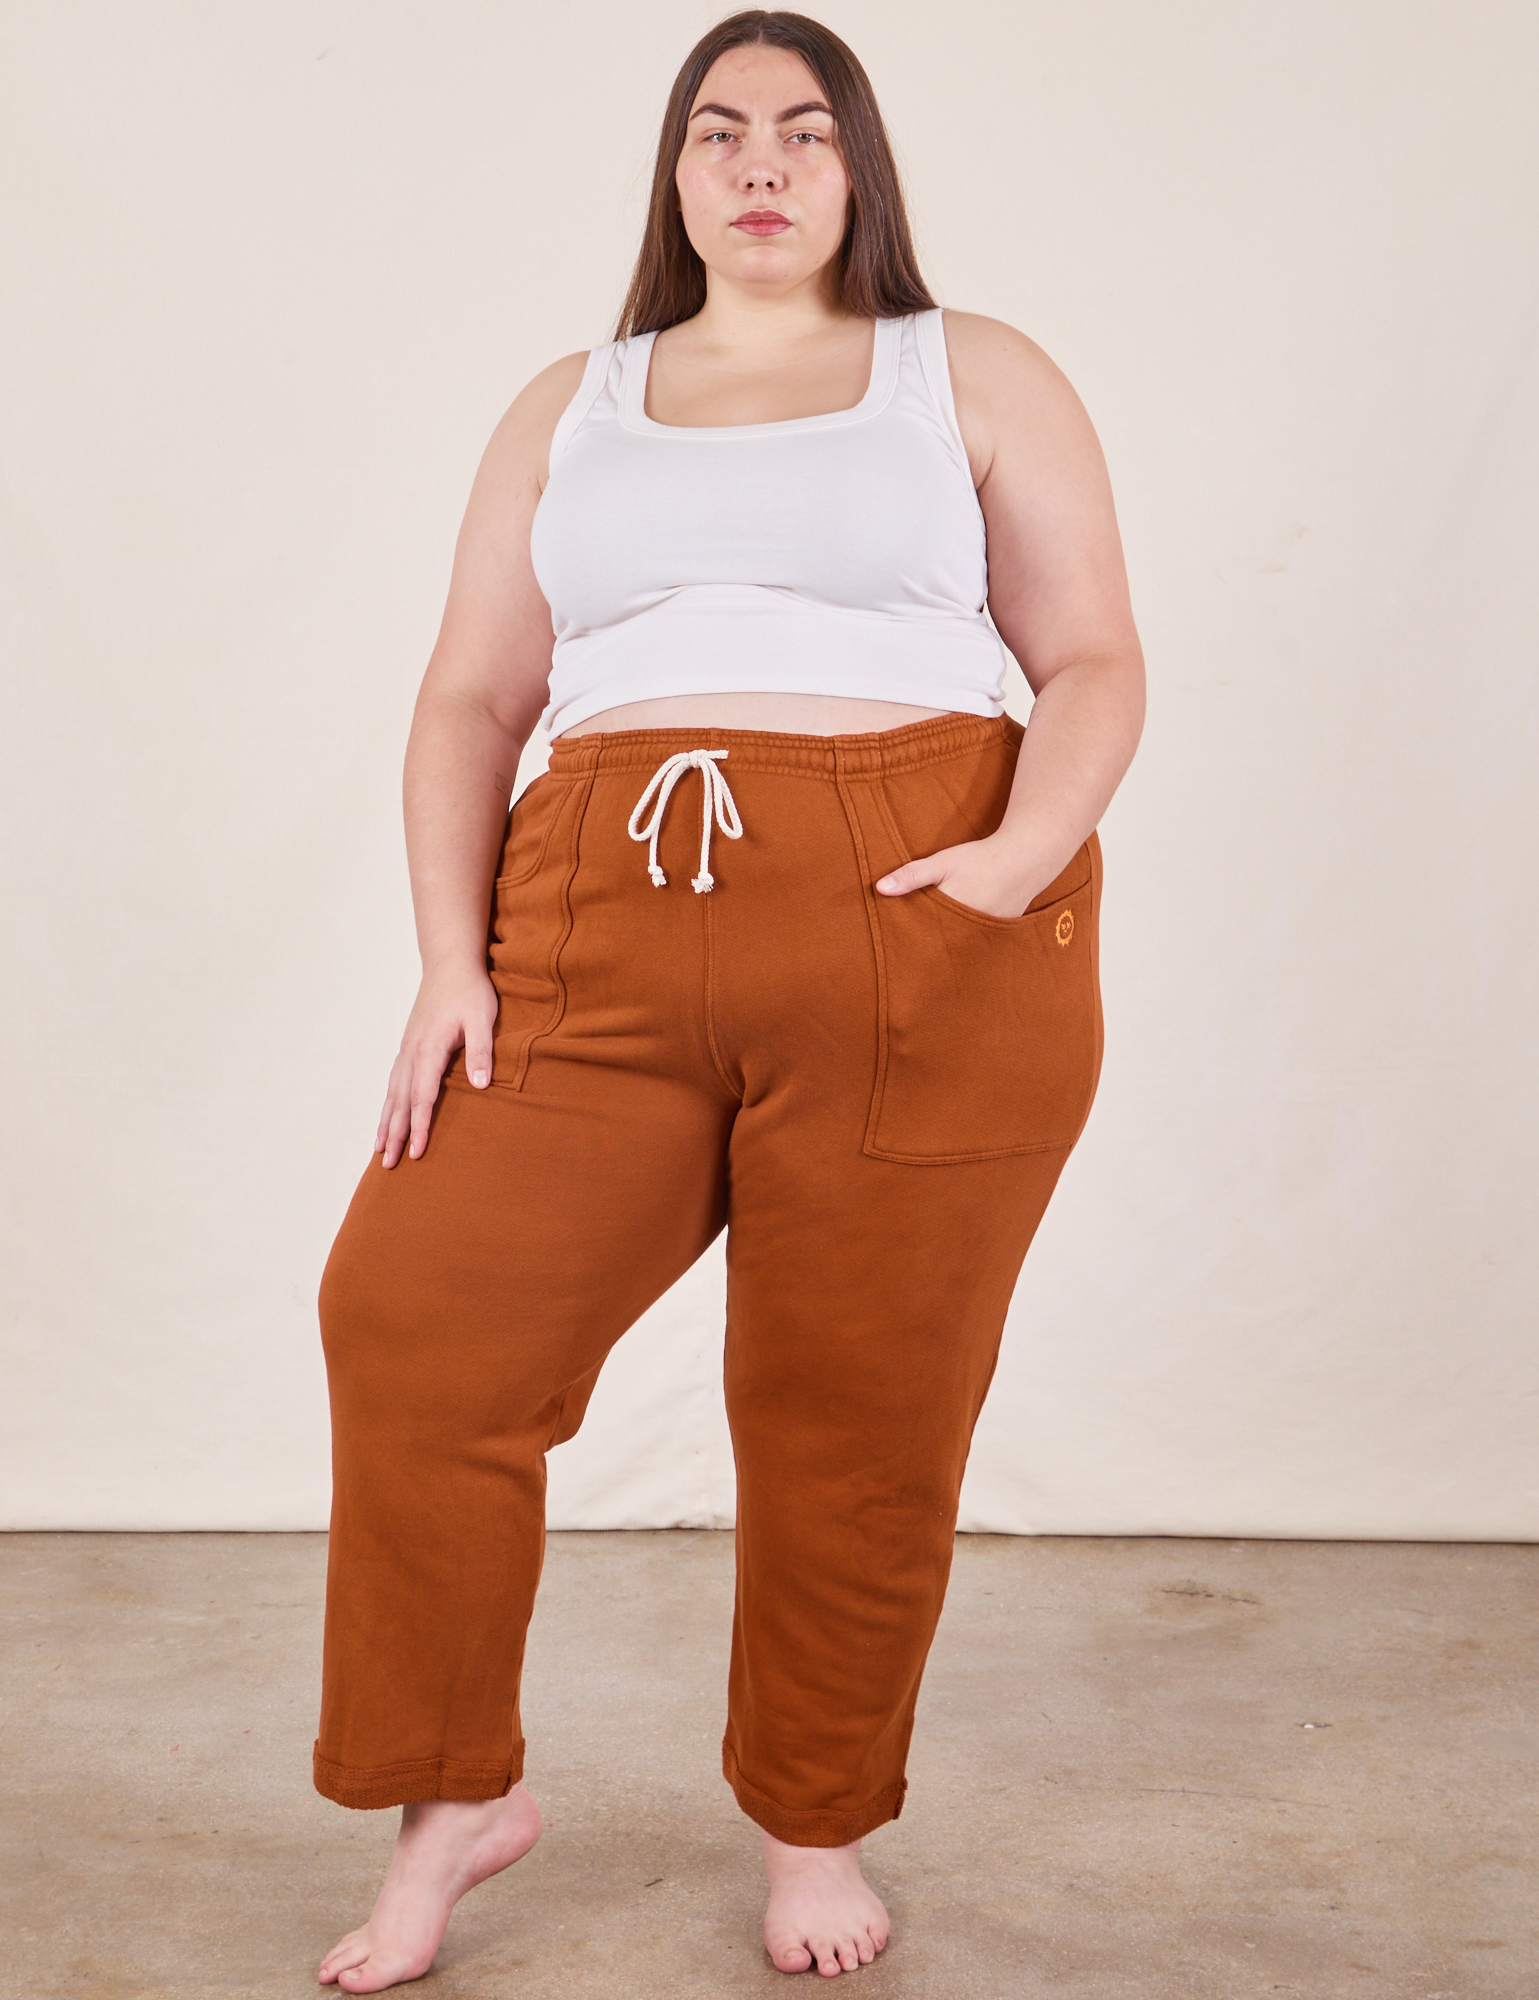 Marielena is 5&#39;8&quot; and wearing 2XL Cropped Rolled Cuff Sweatpants in Burnt Terracotta paired with vintage off-white Cropped Tank Top